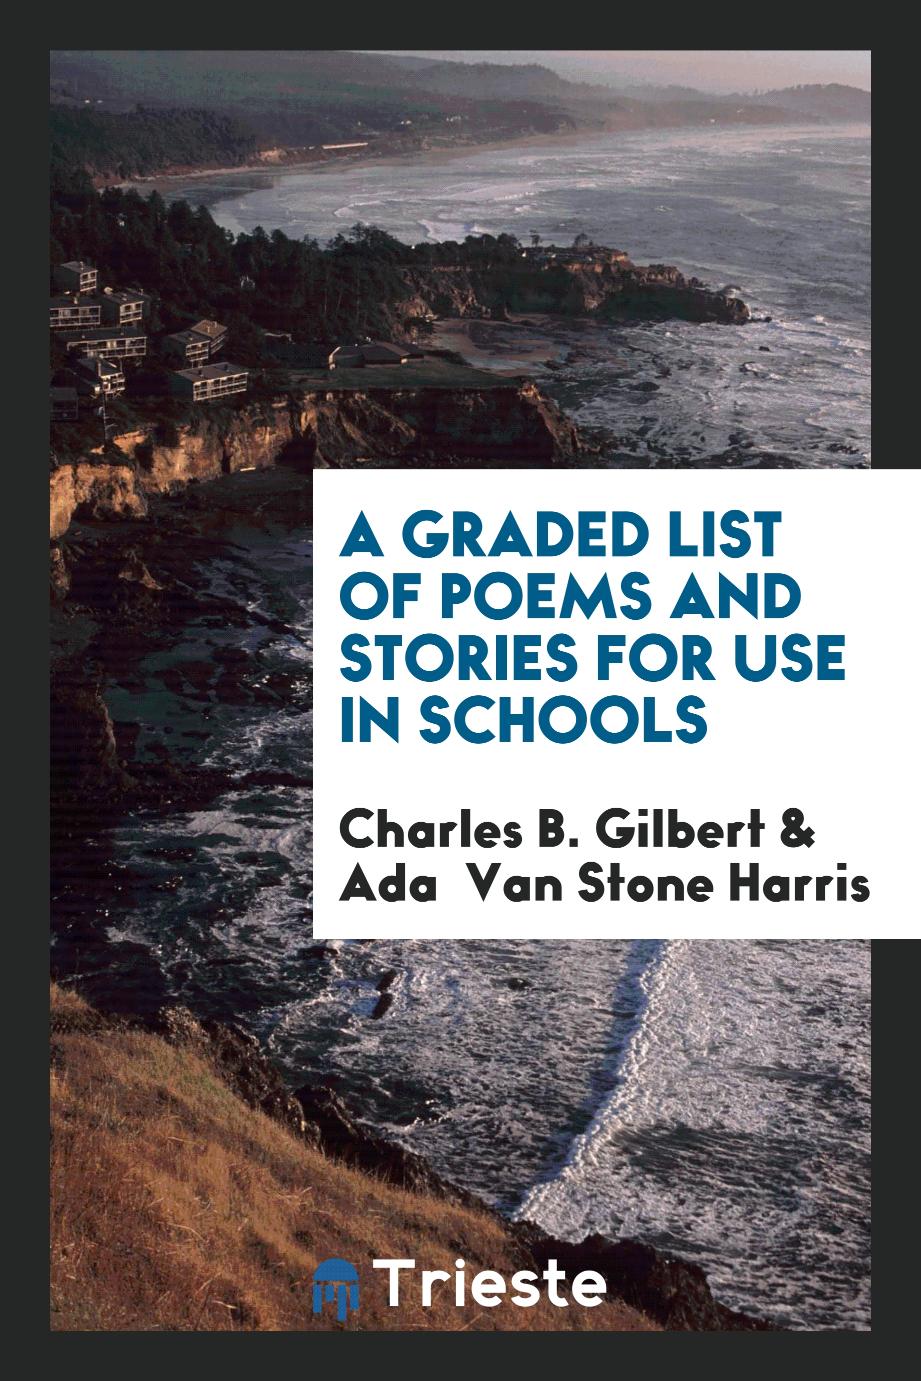 A Graded List of Poems and Stories for Use in Schools